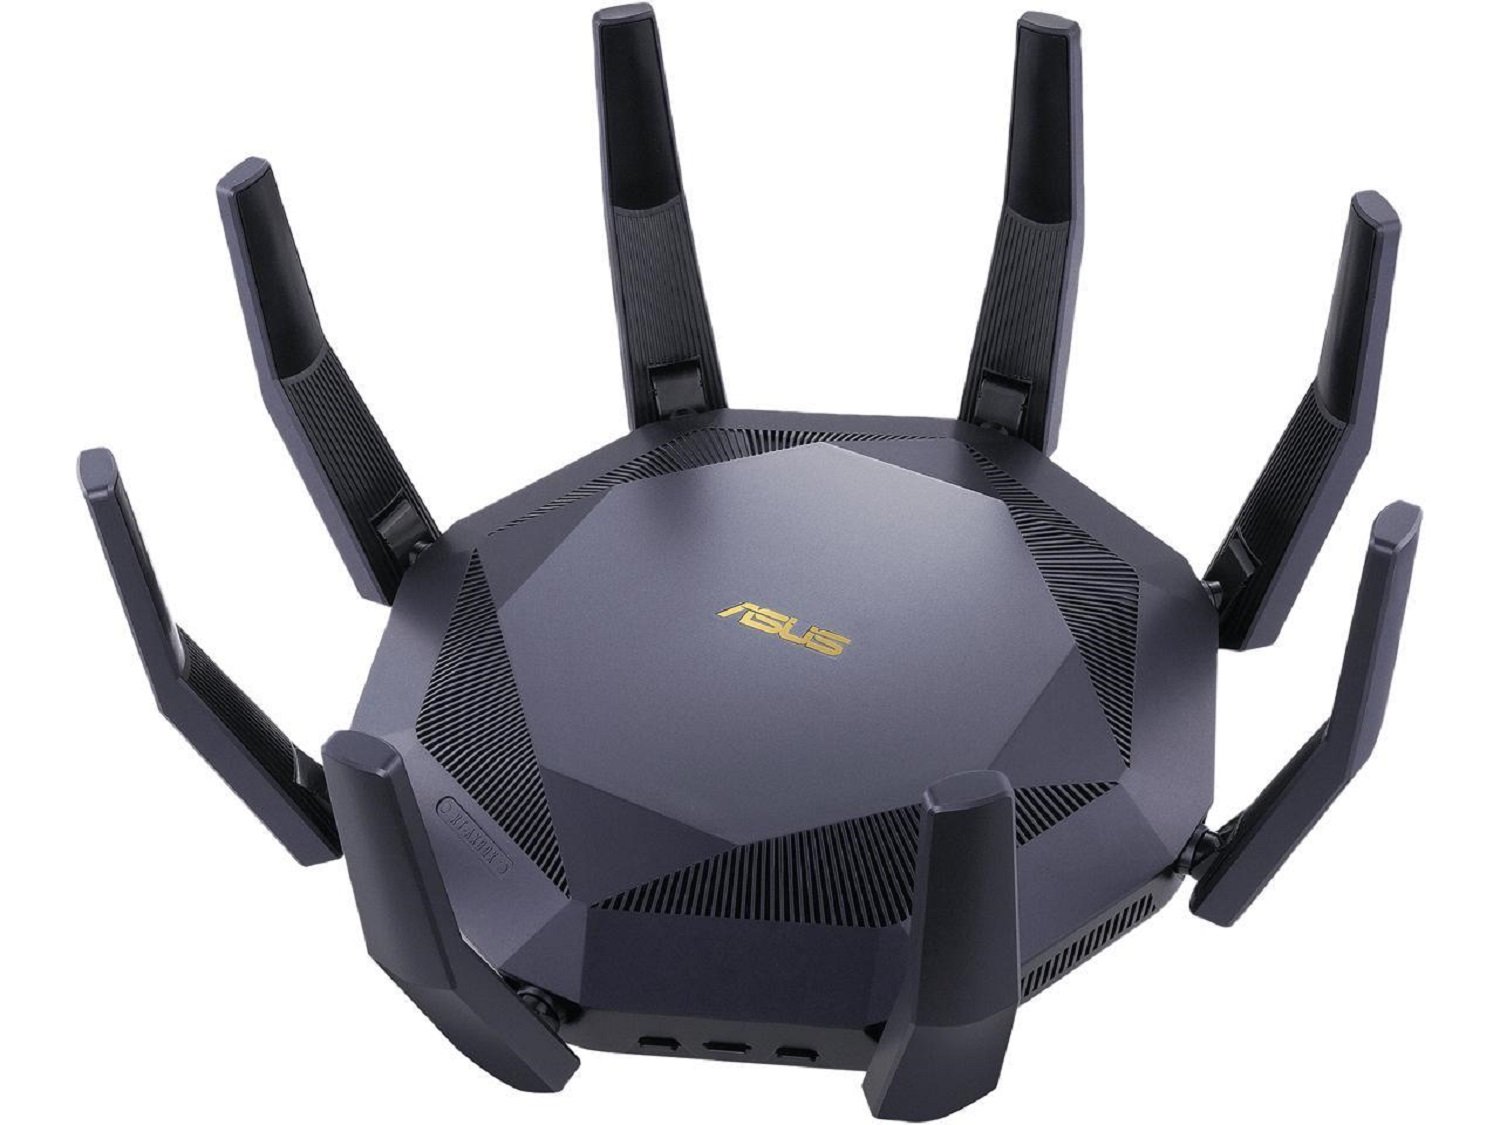 wifi-6e-routers-introduced-by-netgear-linksys-tp-link-at-ces-the